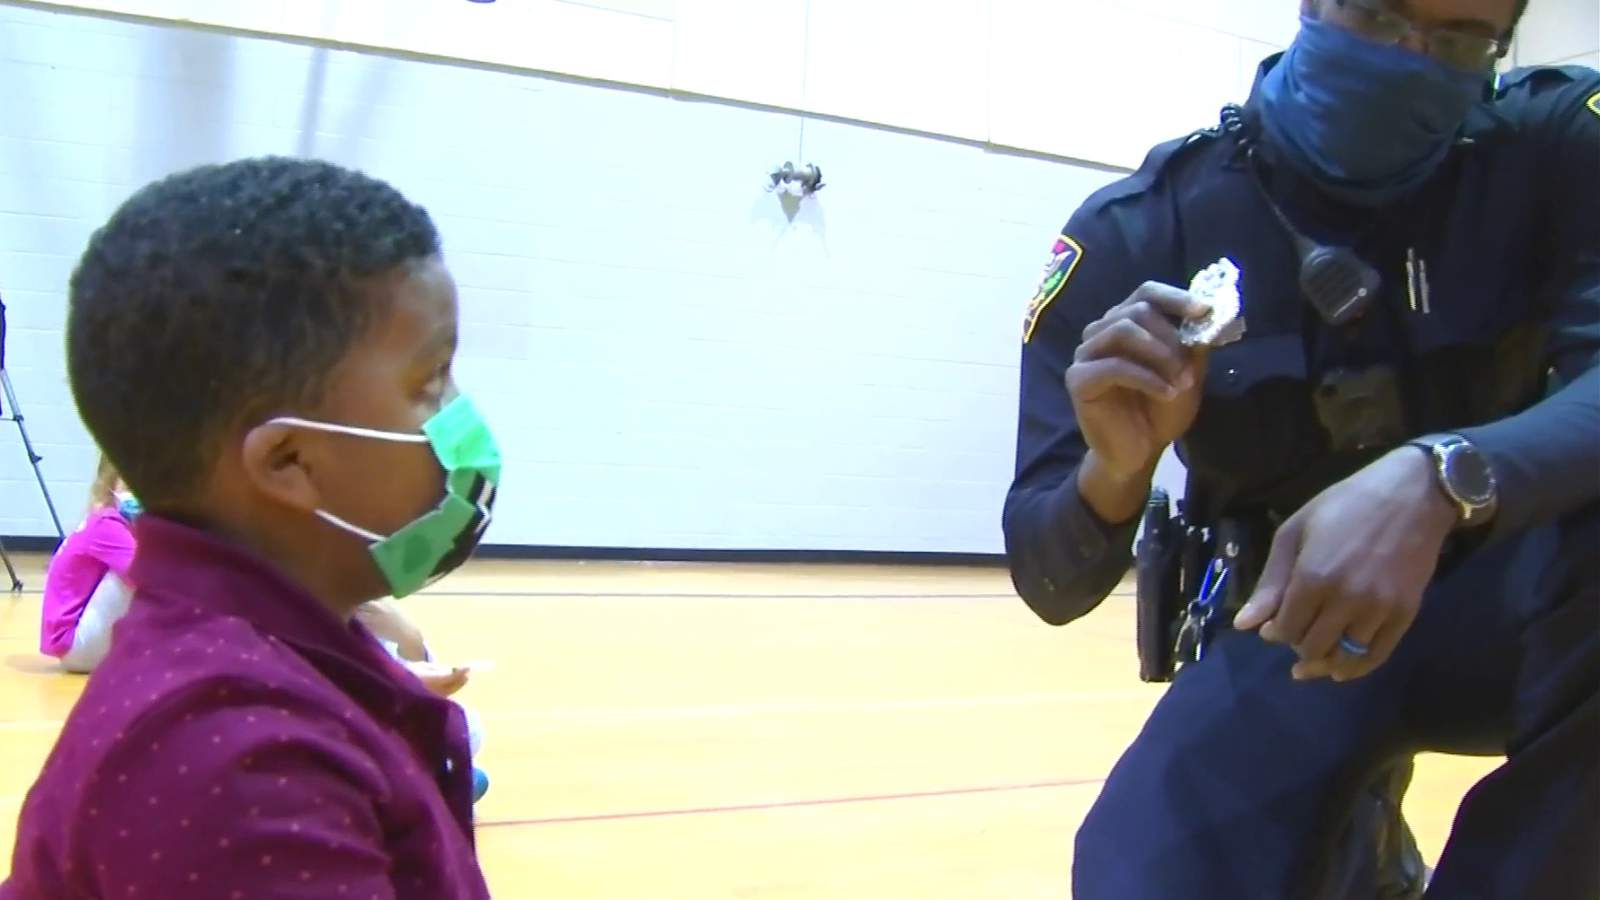 ‘I want to catch bad guys’: 6-year-old boy gets surprise visit from Roanoke Police